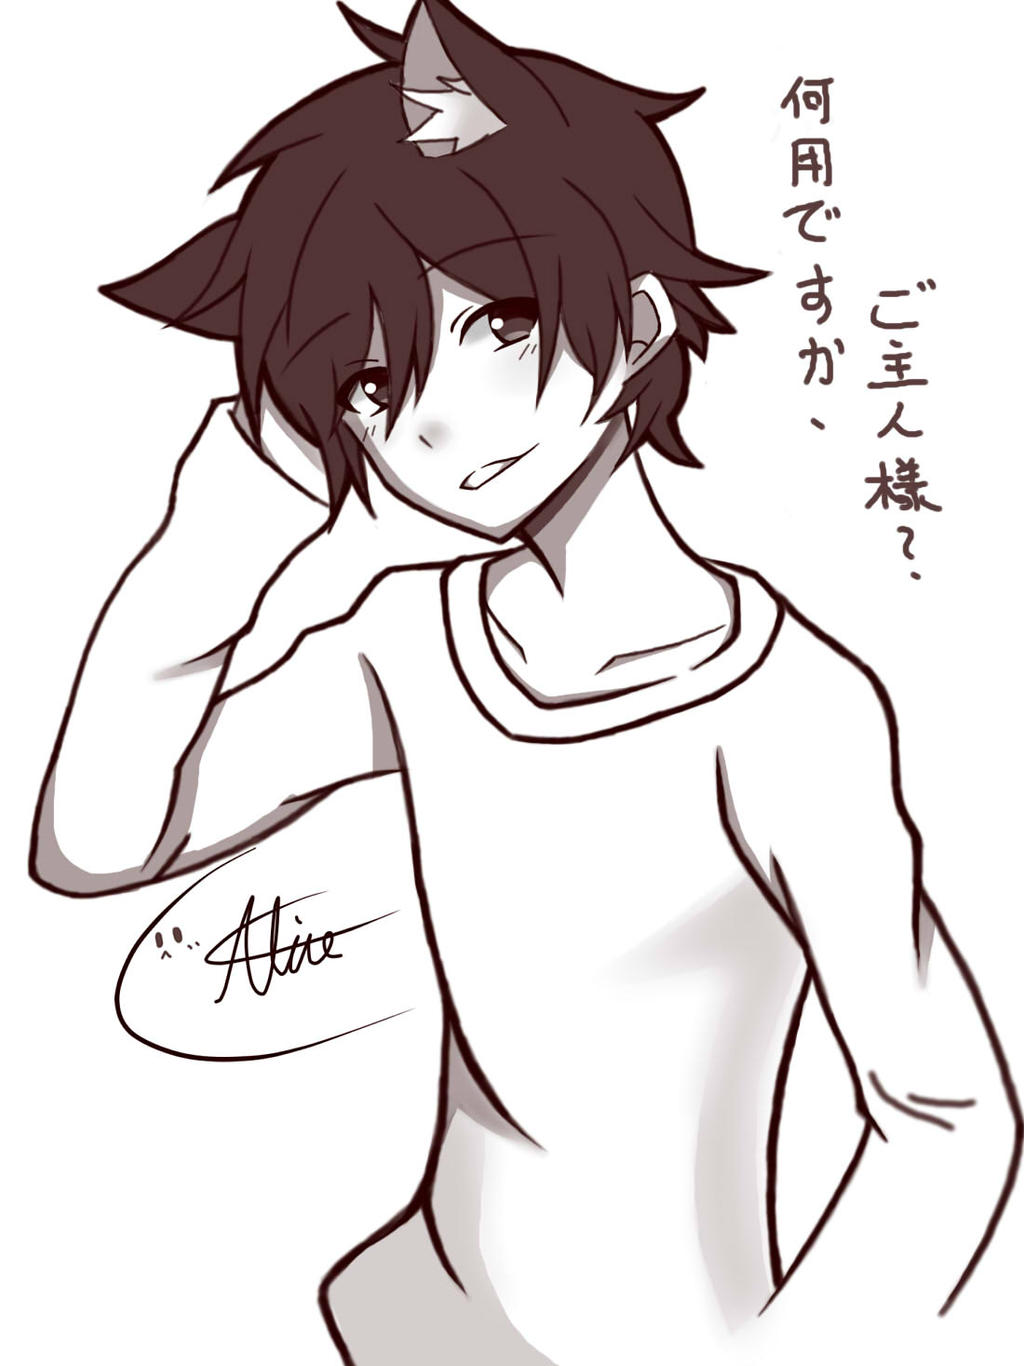 Boy with cat ears by Alicehaha on DeviantArt